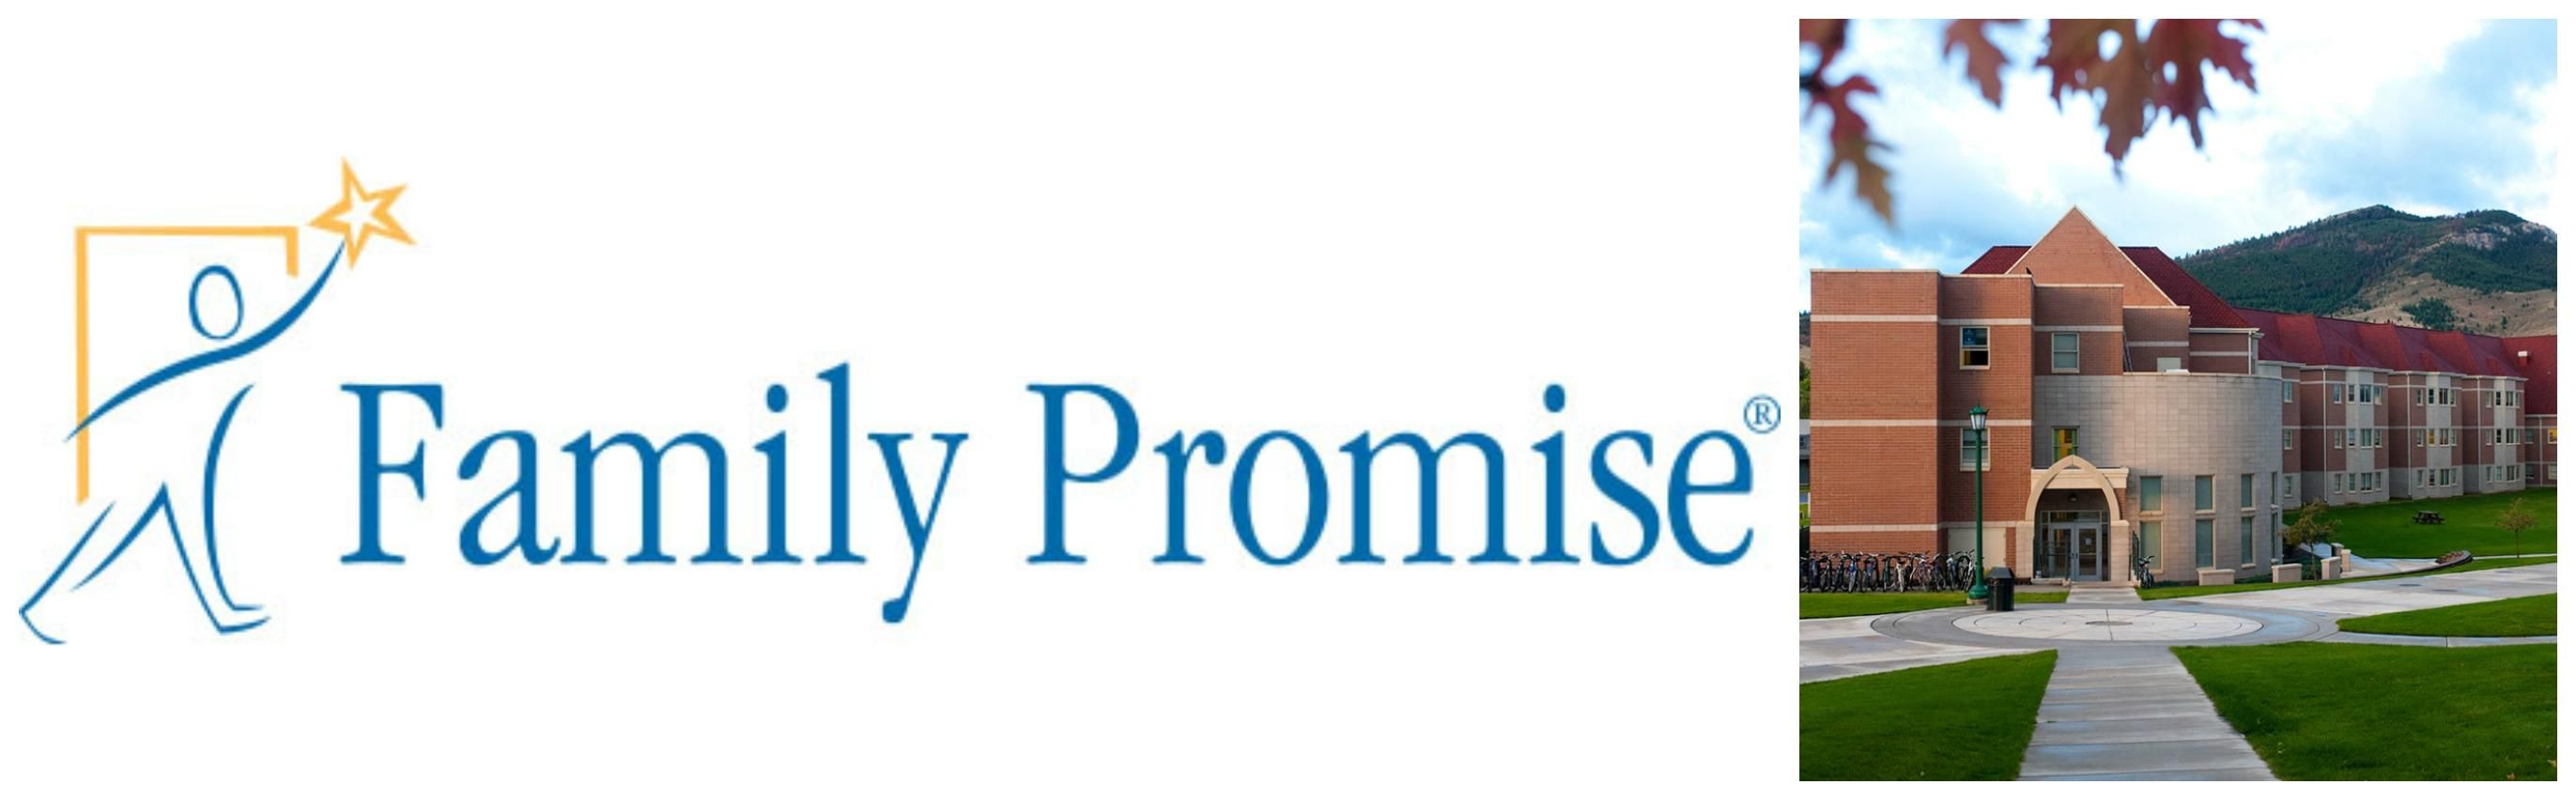 Family Promise Graphic